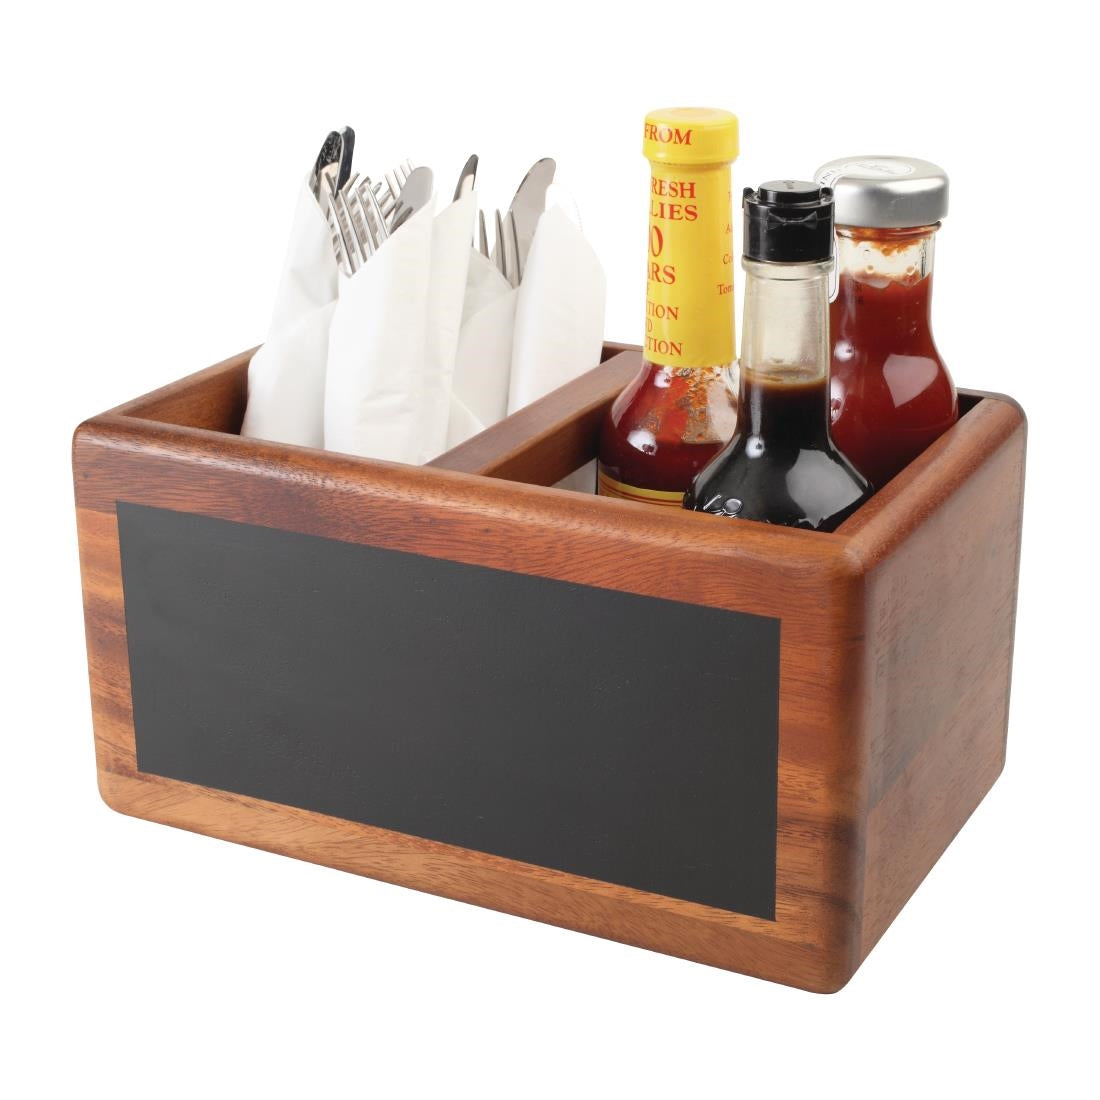 CL179 T&G Food Glorious Food Table Tidy with Chalkboard